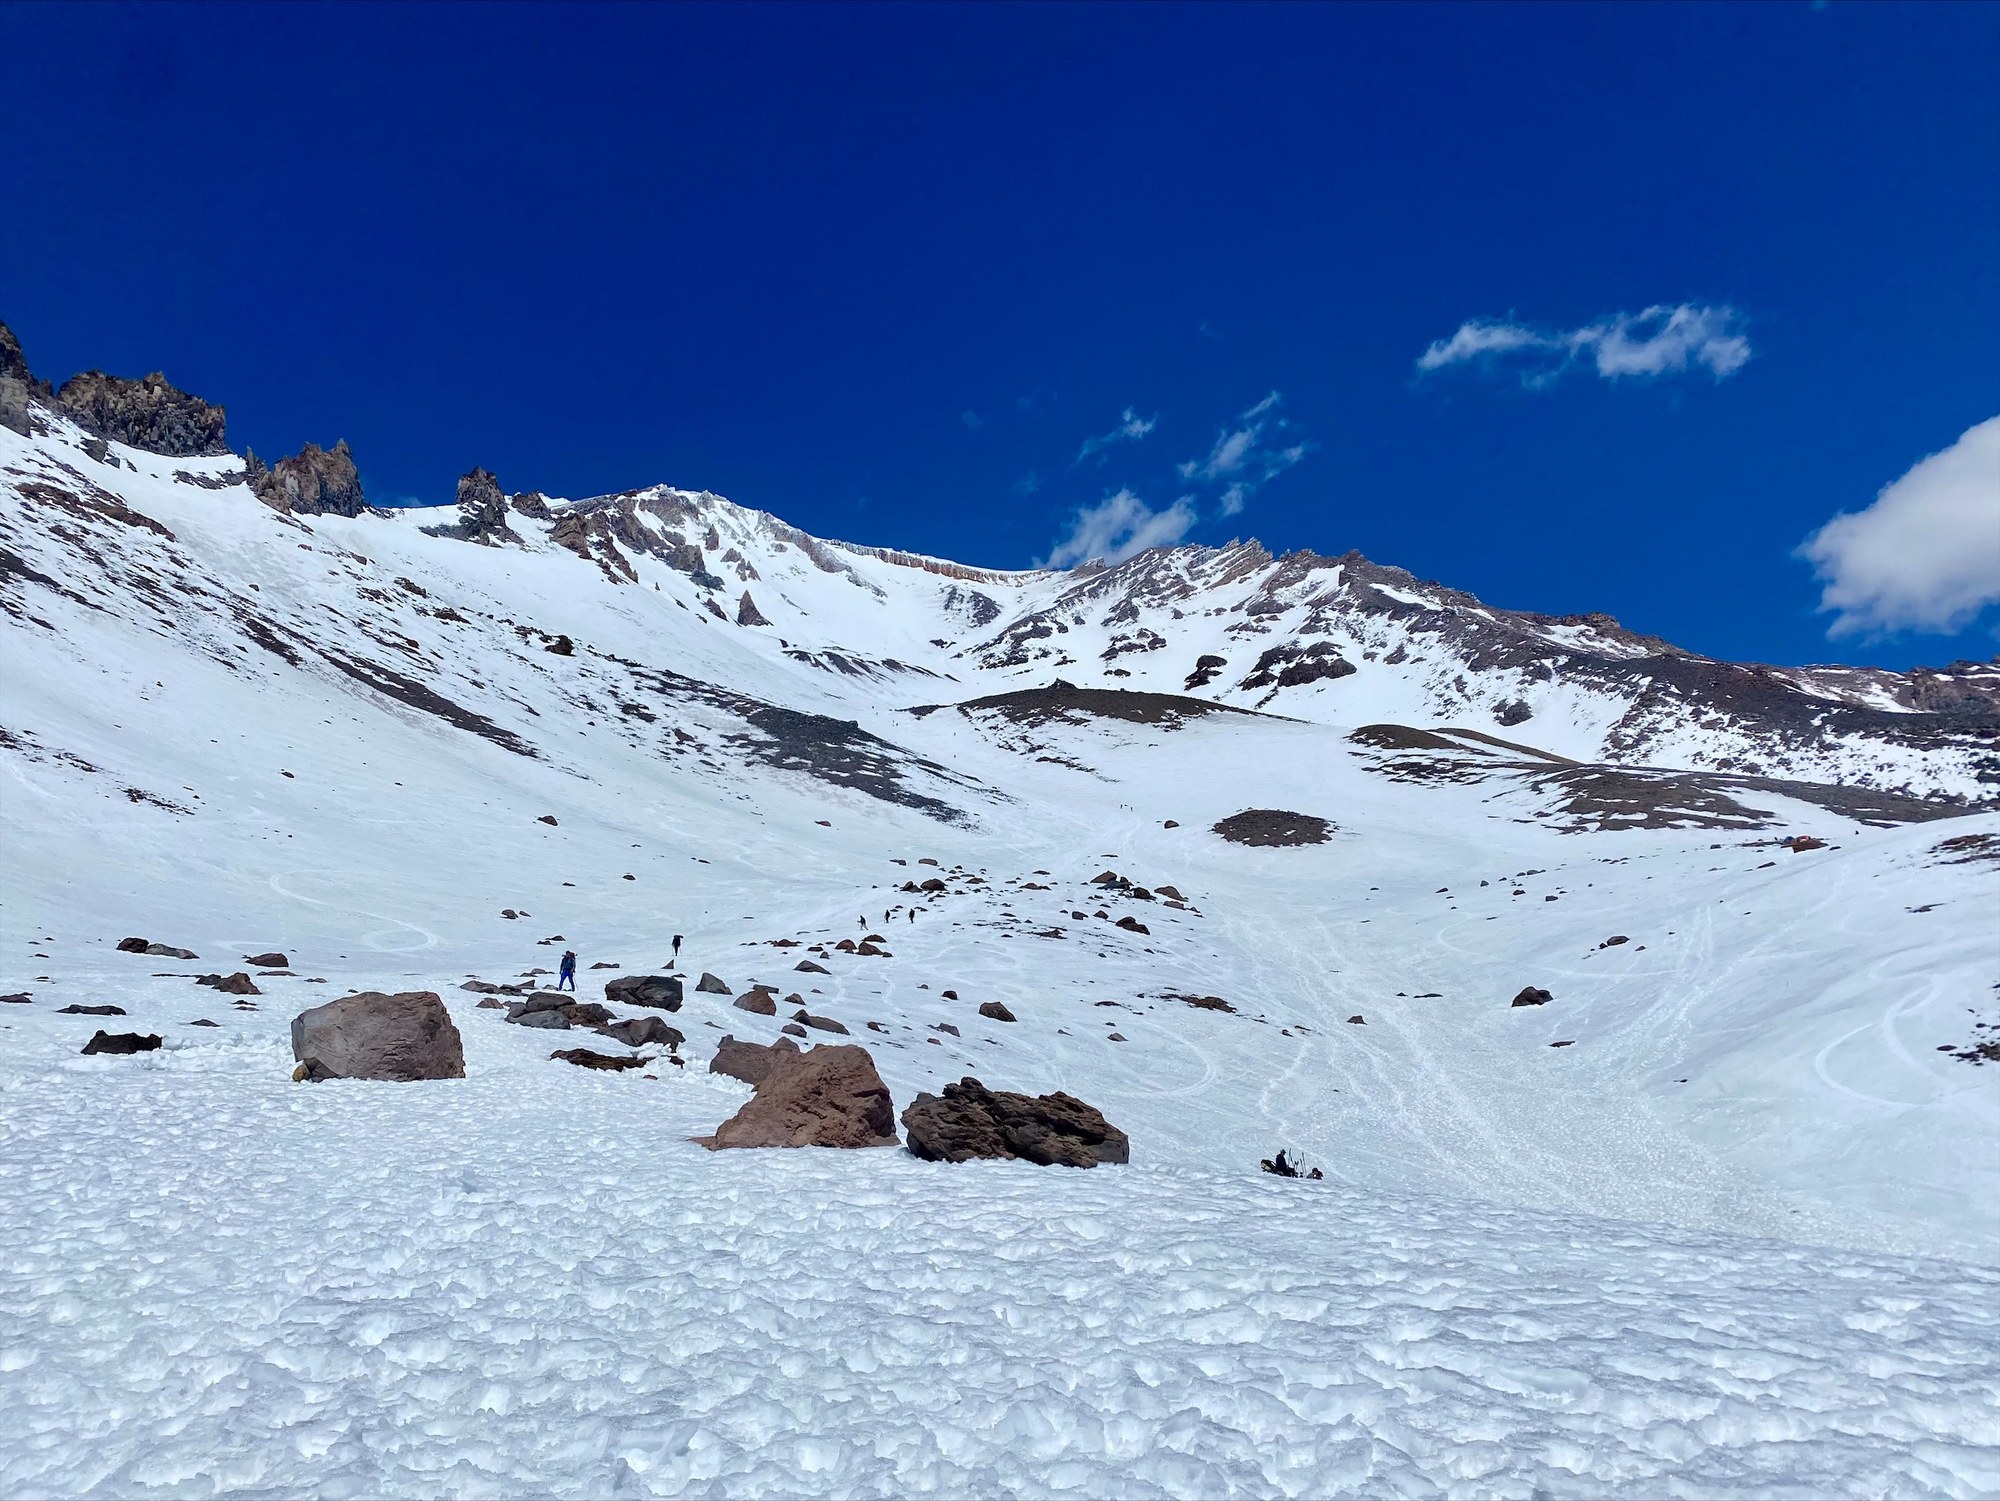 Mount Shasta/Avalanche Gulch — The Mountaineers